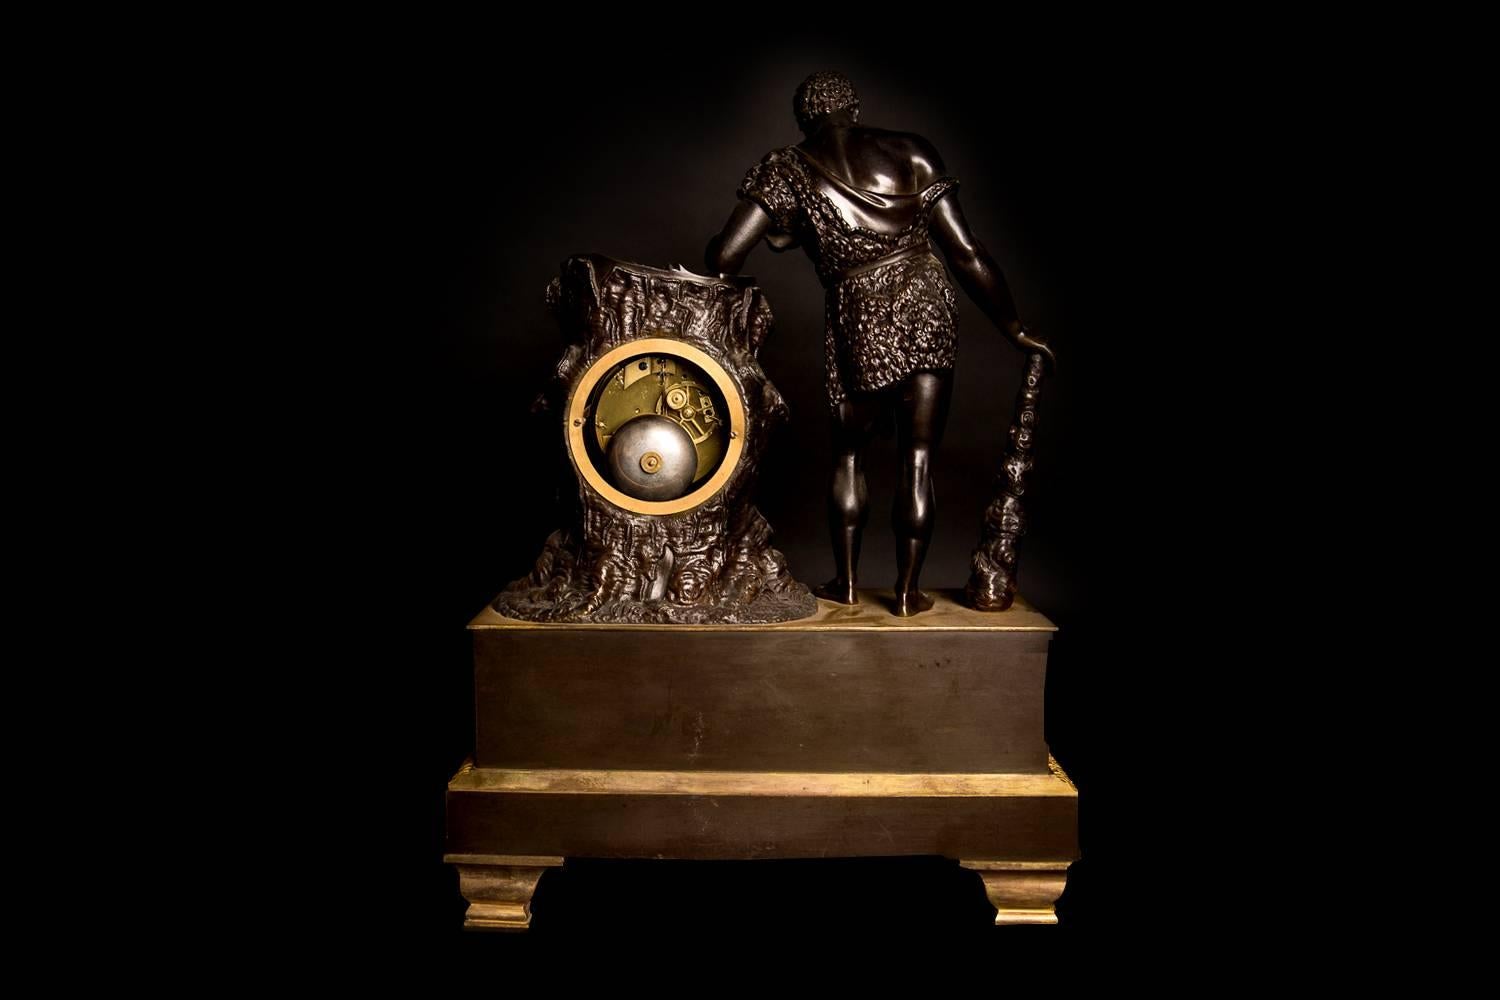 19th Century Large French Empire Ormolu Hercules and the Apple of Hesperides Clock circa 1820